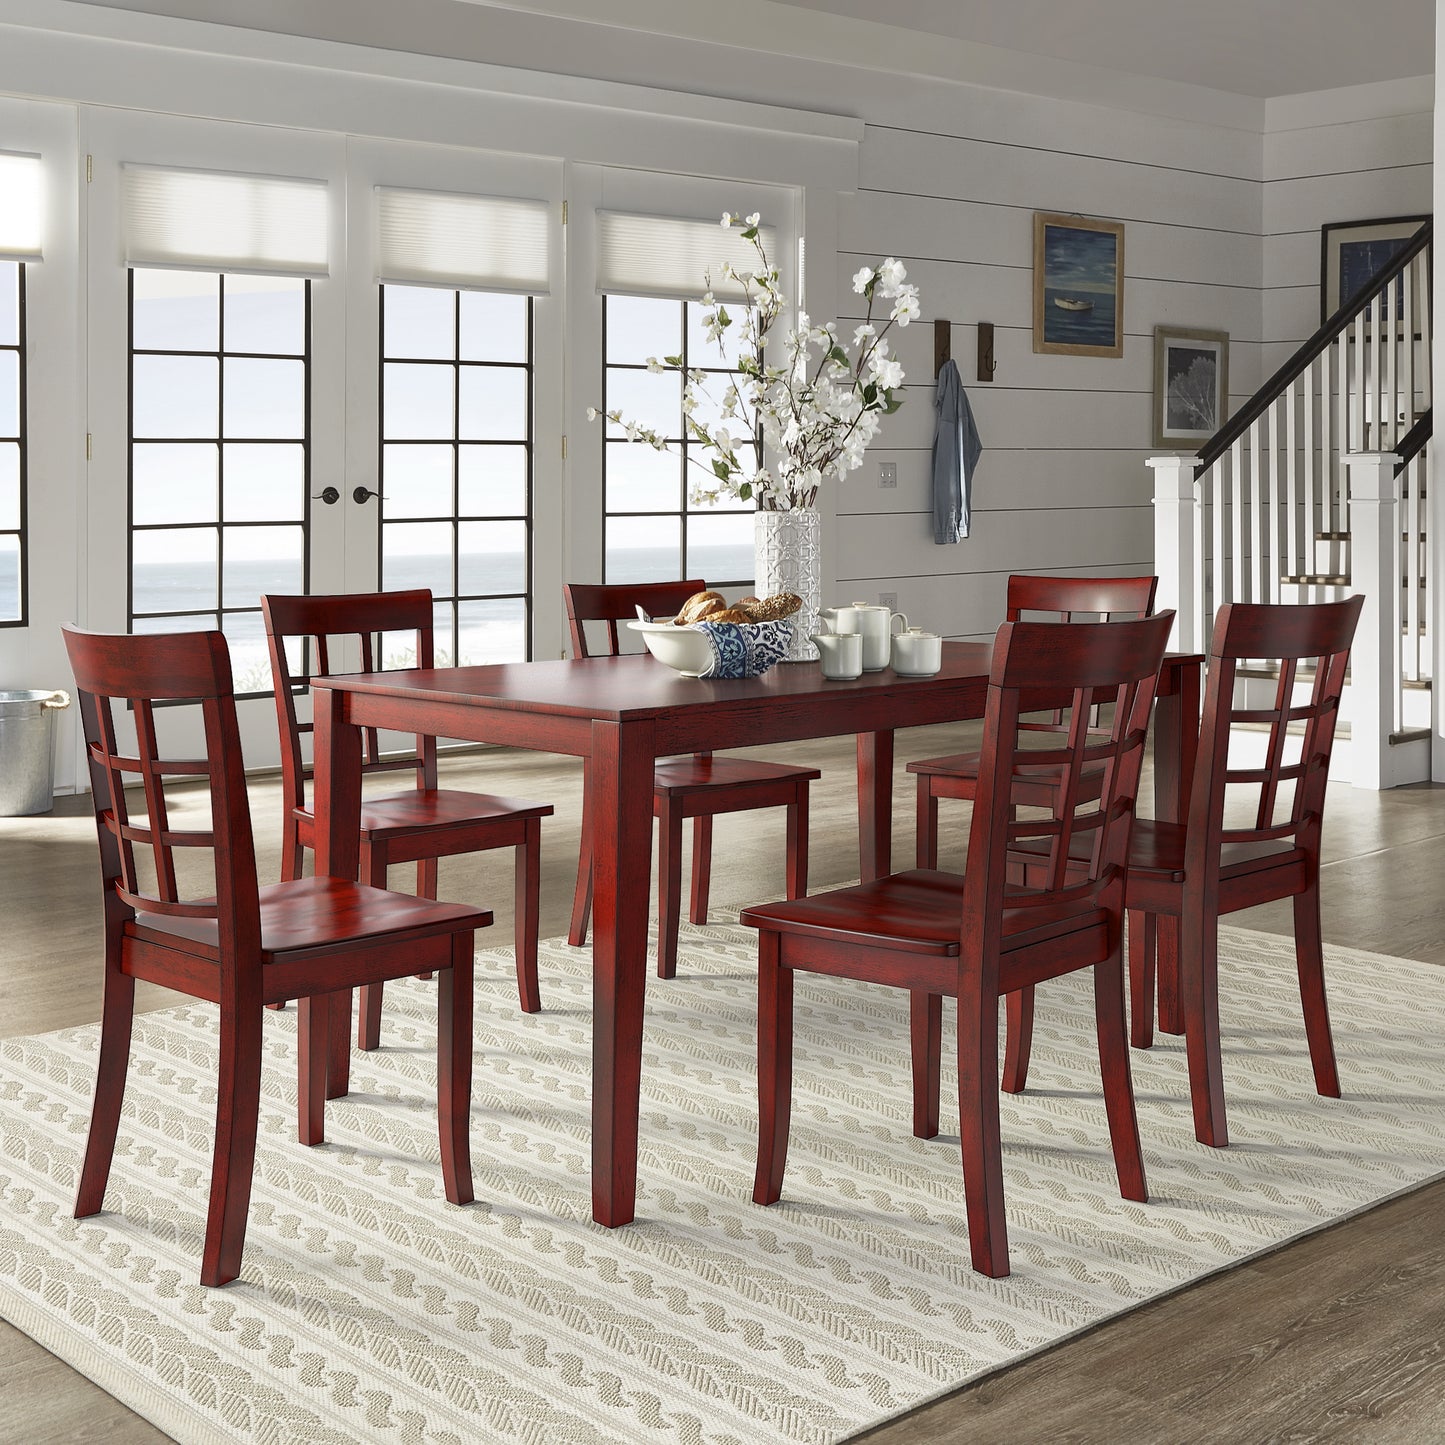 60-inch Rectangular Antique Berry Red Dining Set - Window Back Chairs, 7-Piece Set